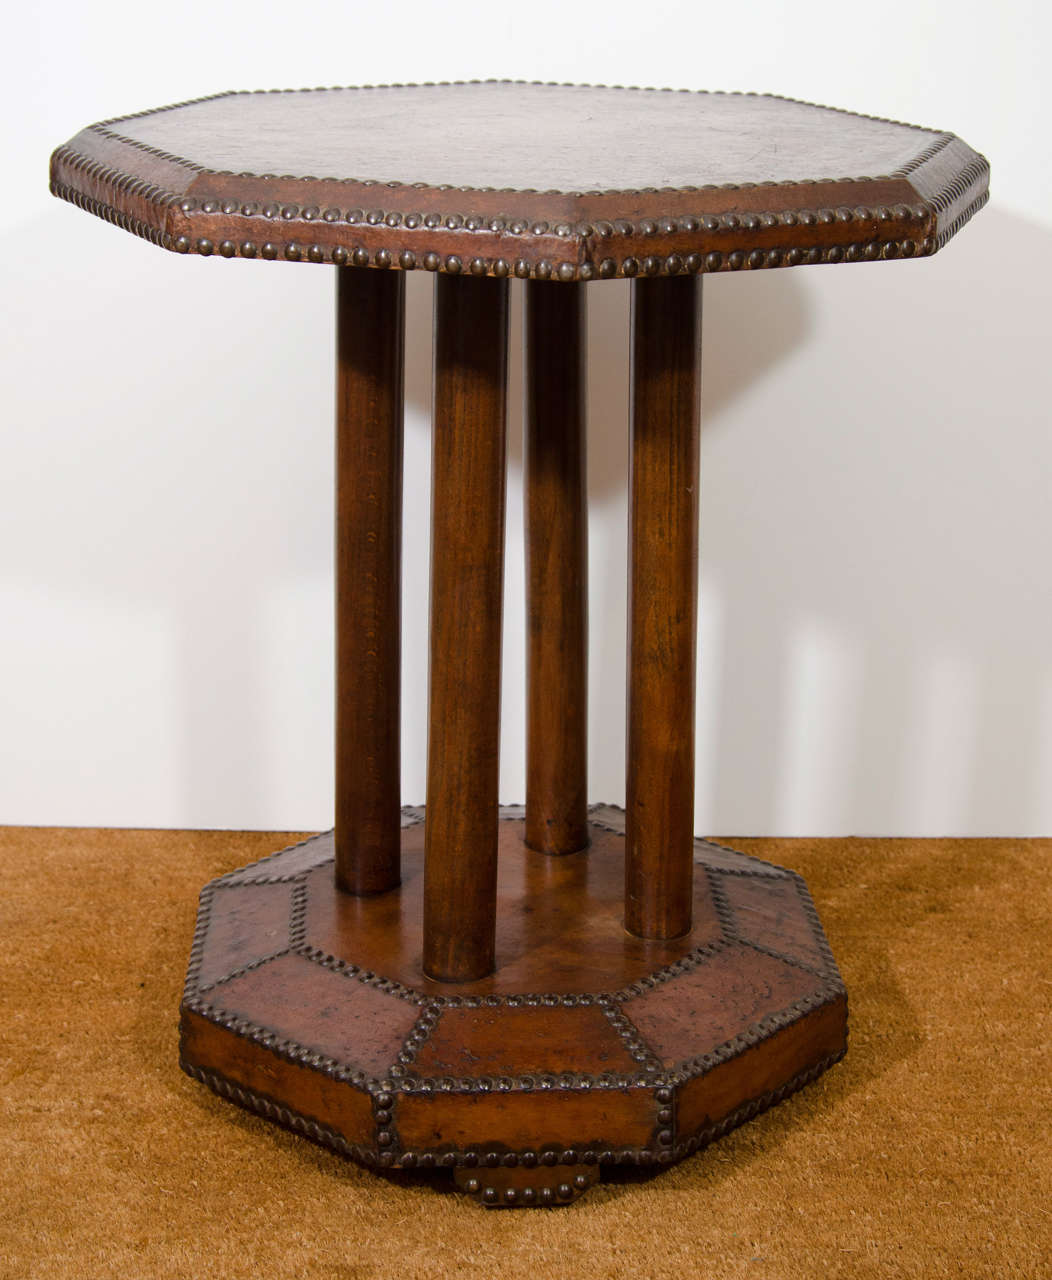 The leather table with octagonal top above 4 wooden cylindar supports, resting on an octagonal base raised on leather block feet, the leather with close-nailed trim/decoration